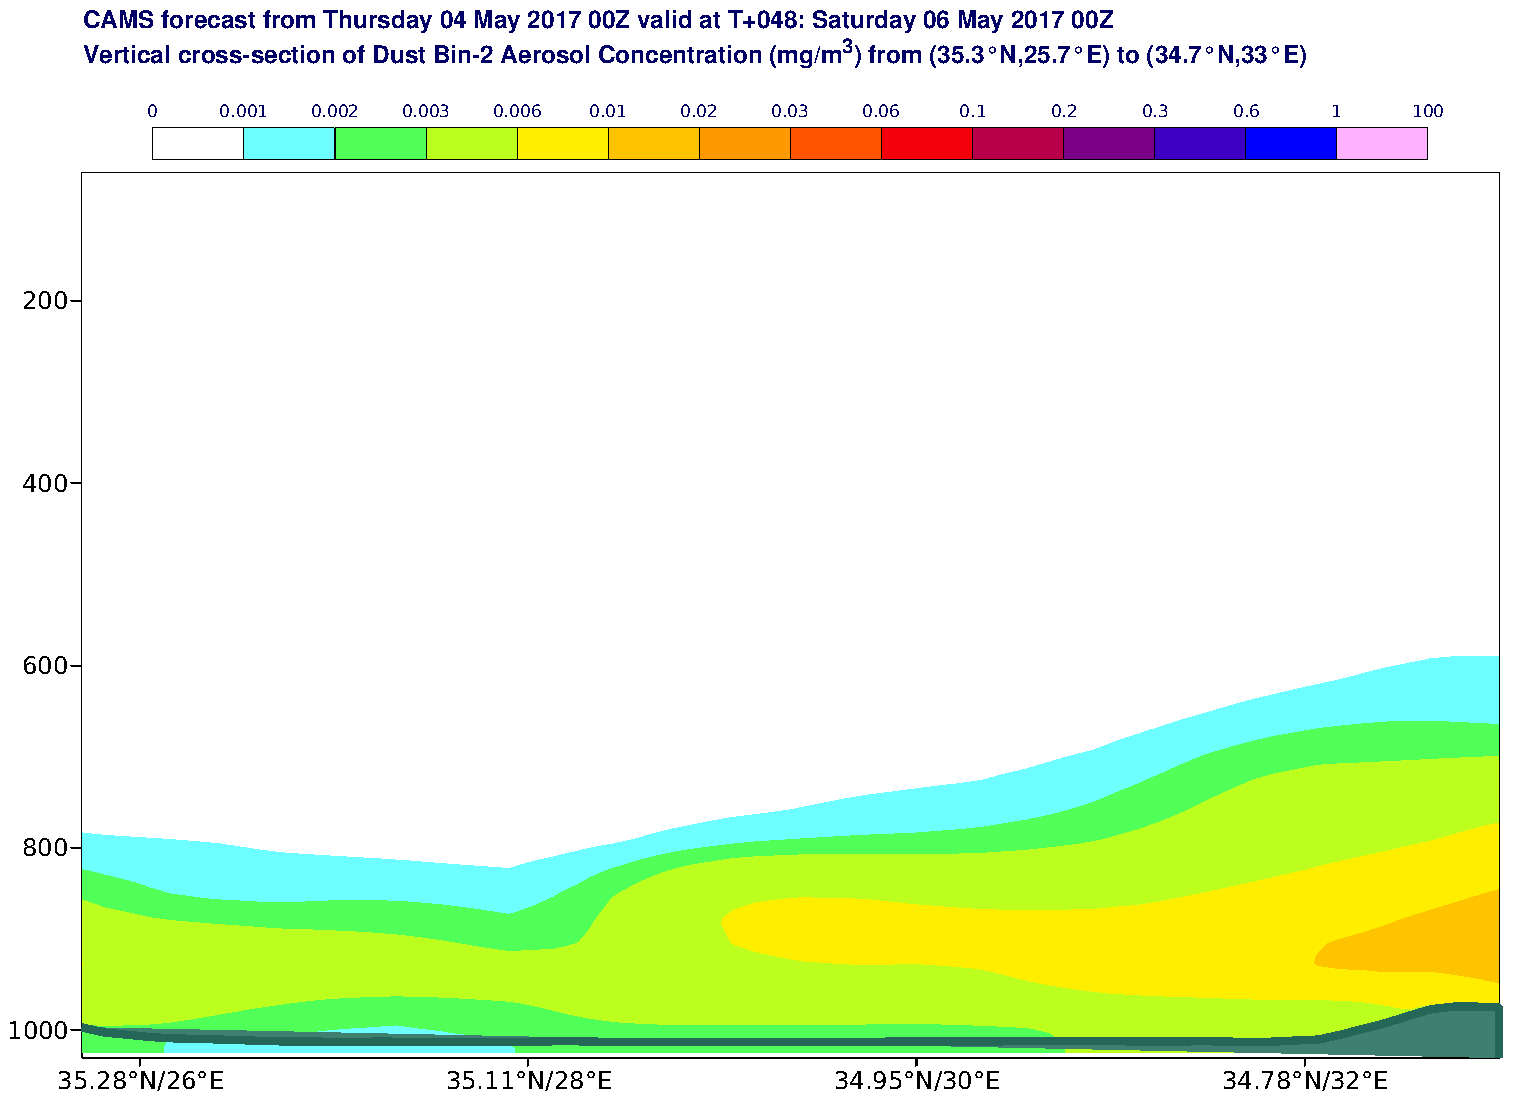 Vertical cross-section of Dust Bin-2 Aerosol Concentration (mg/m3) valid at T48 - 2017-05-06 00:00